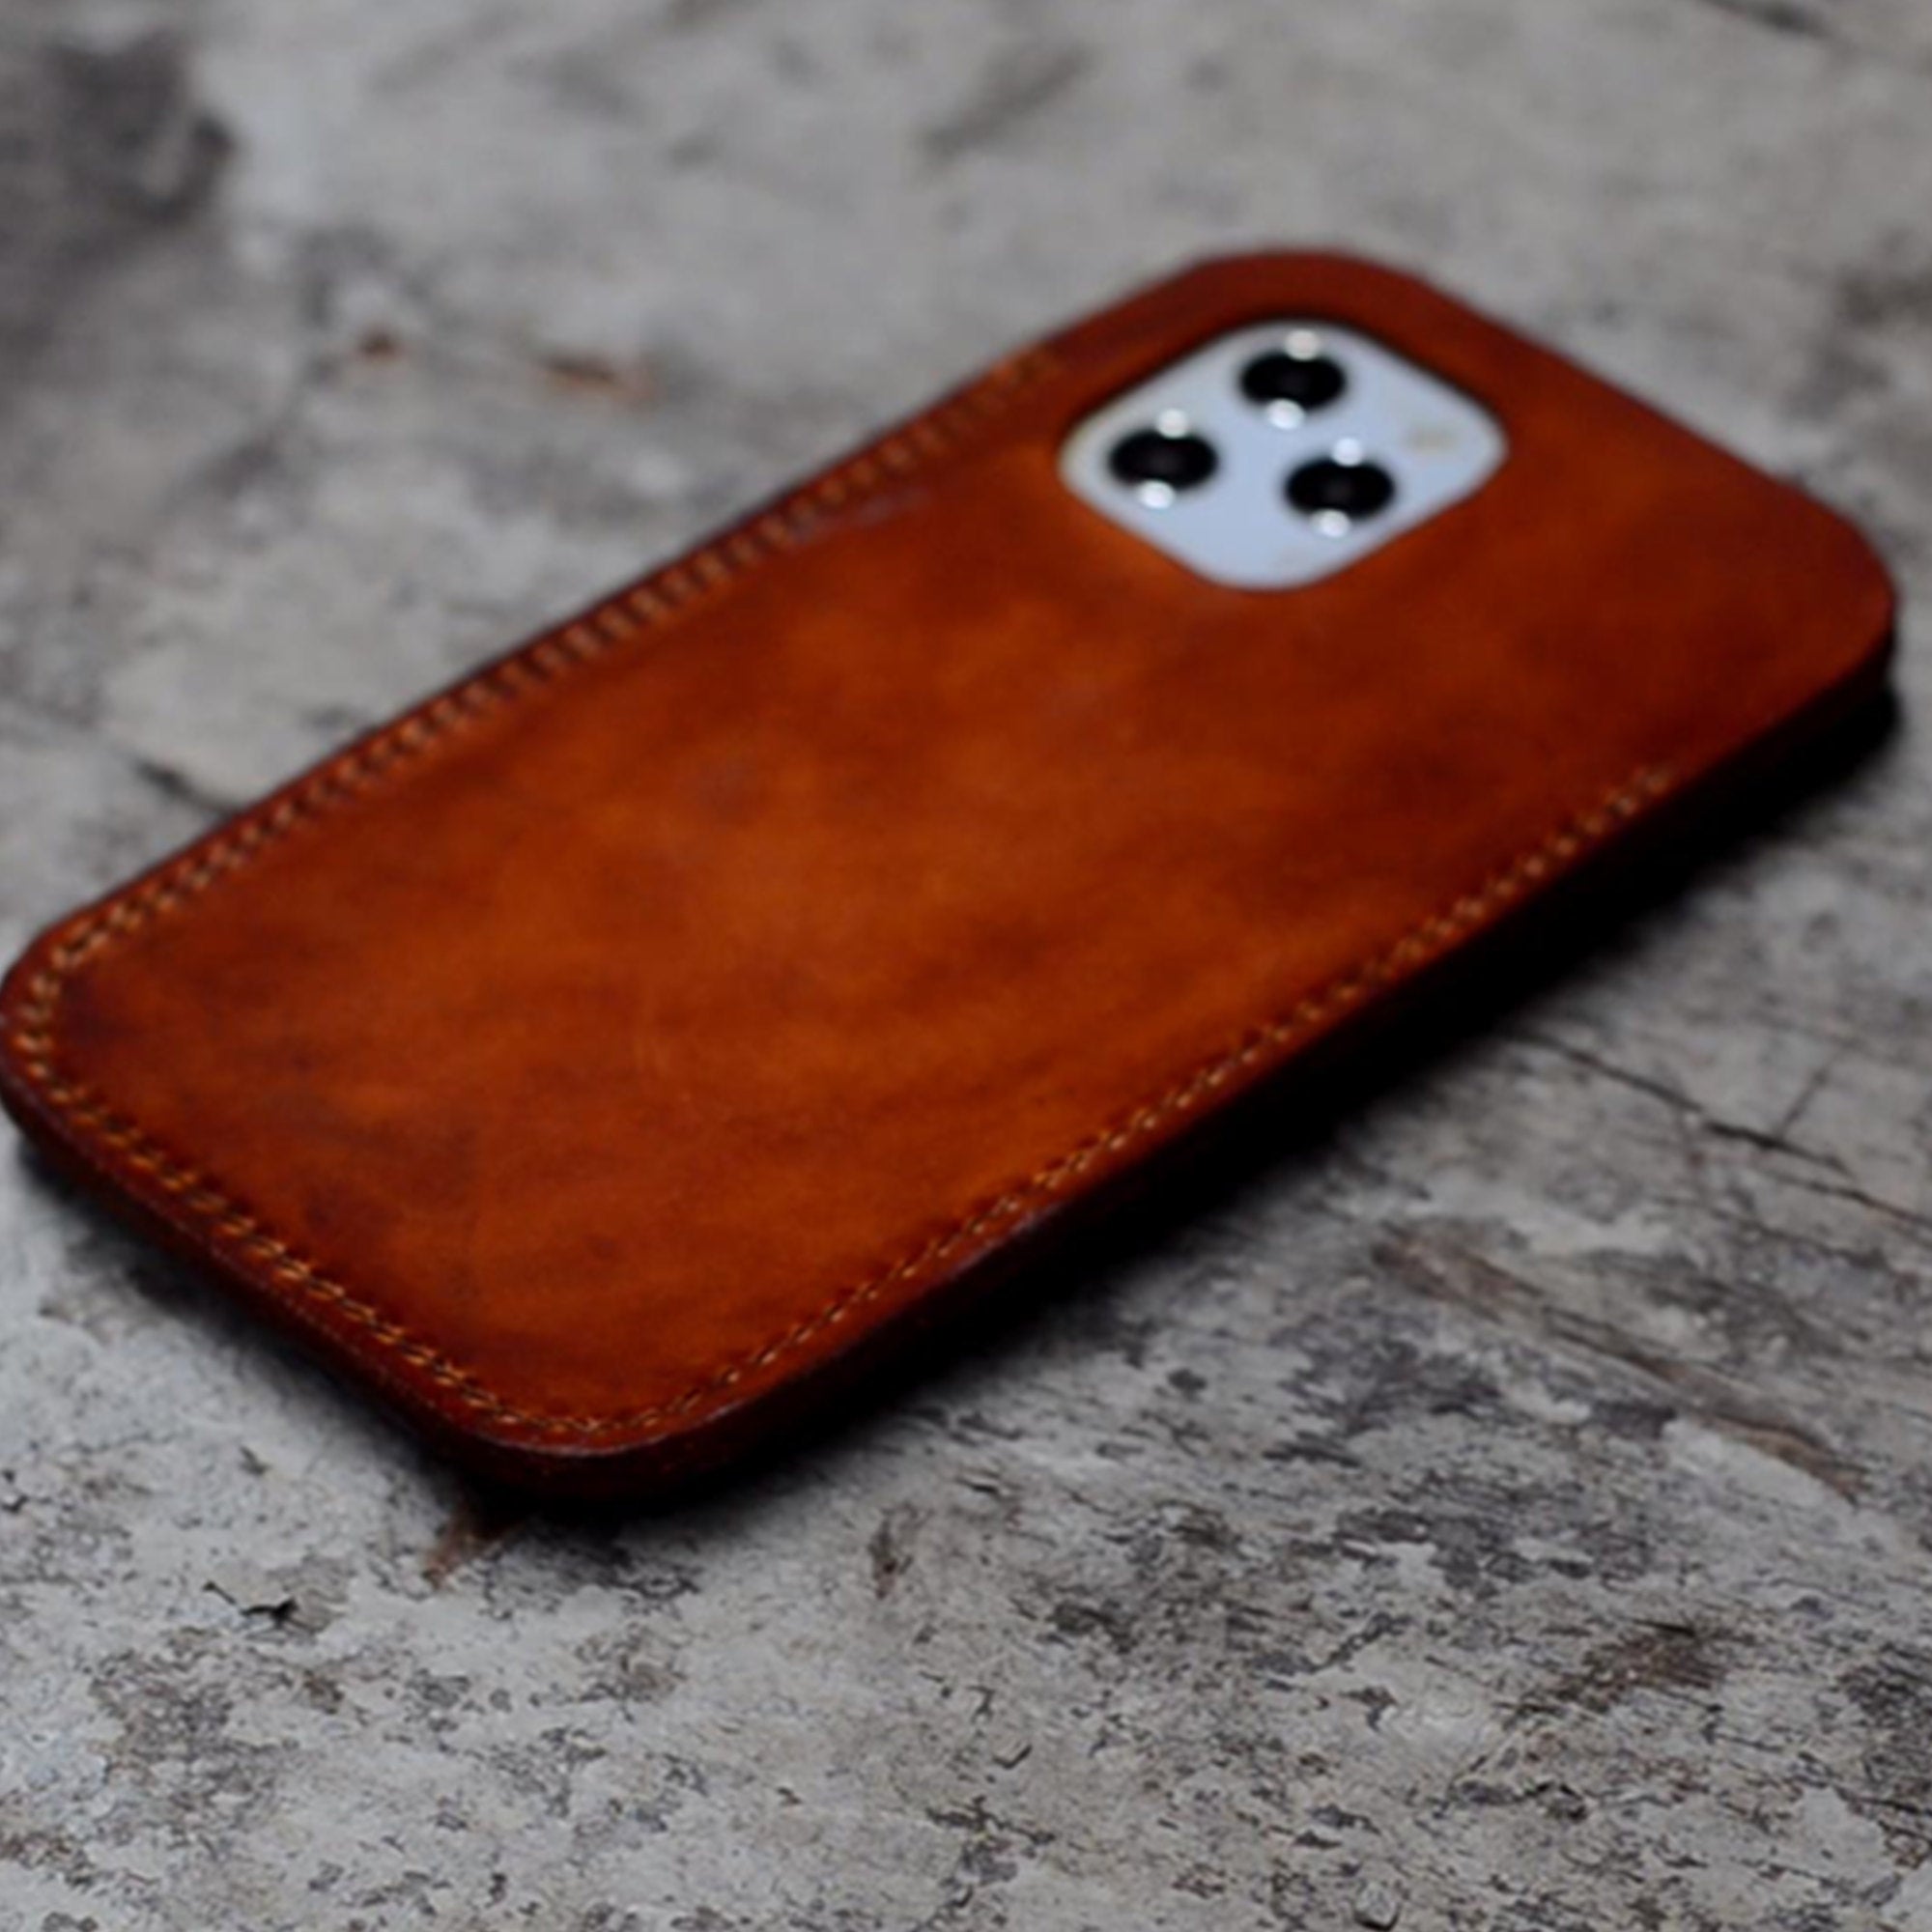 JJNUSA  Best Sale Genuine Leather Distressed for Iphone 13 Full Leather Case   Free Shipping